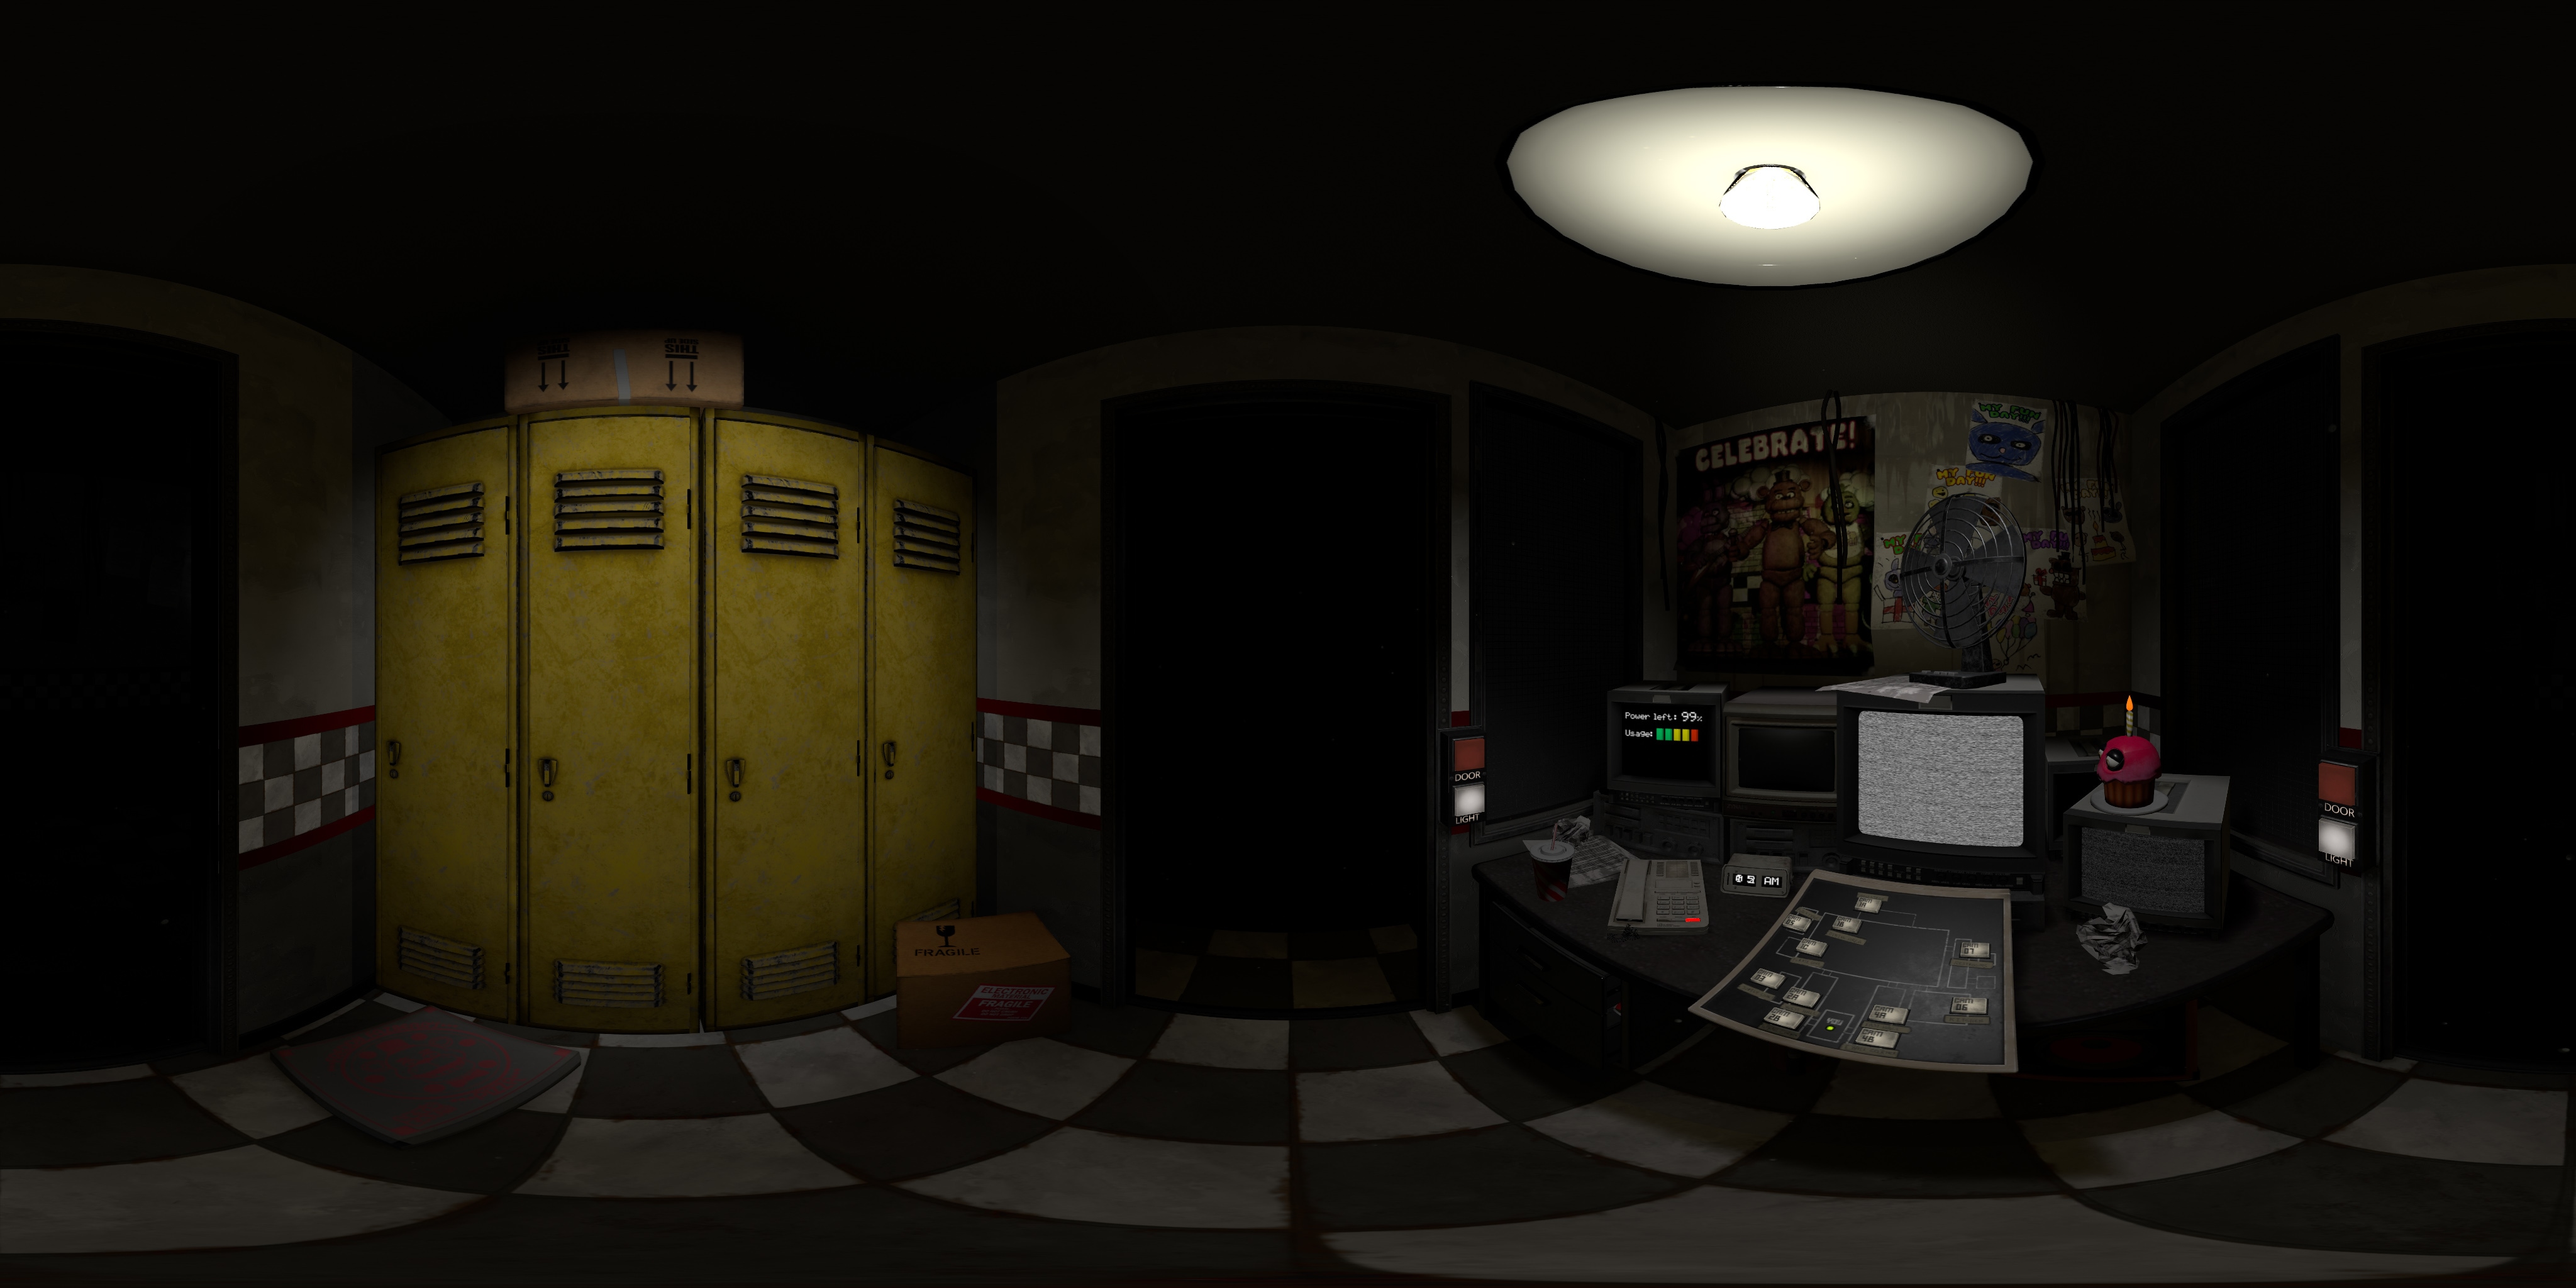 PC / Computer - Five Nights at Freddy's VR: Help Wanted - Cupcake